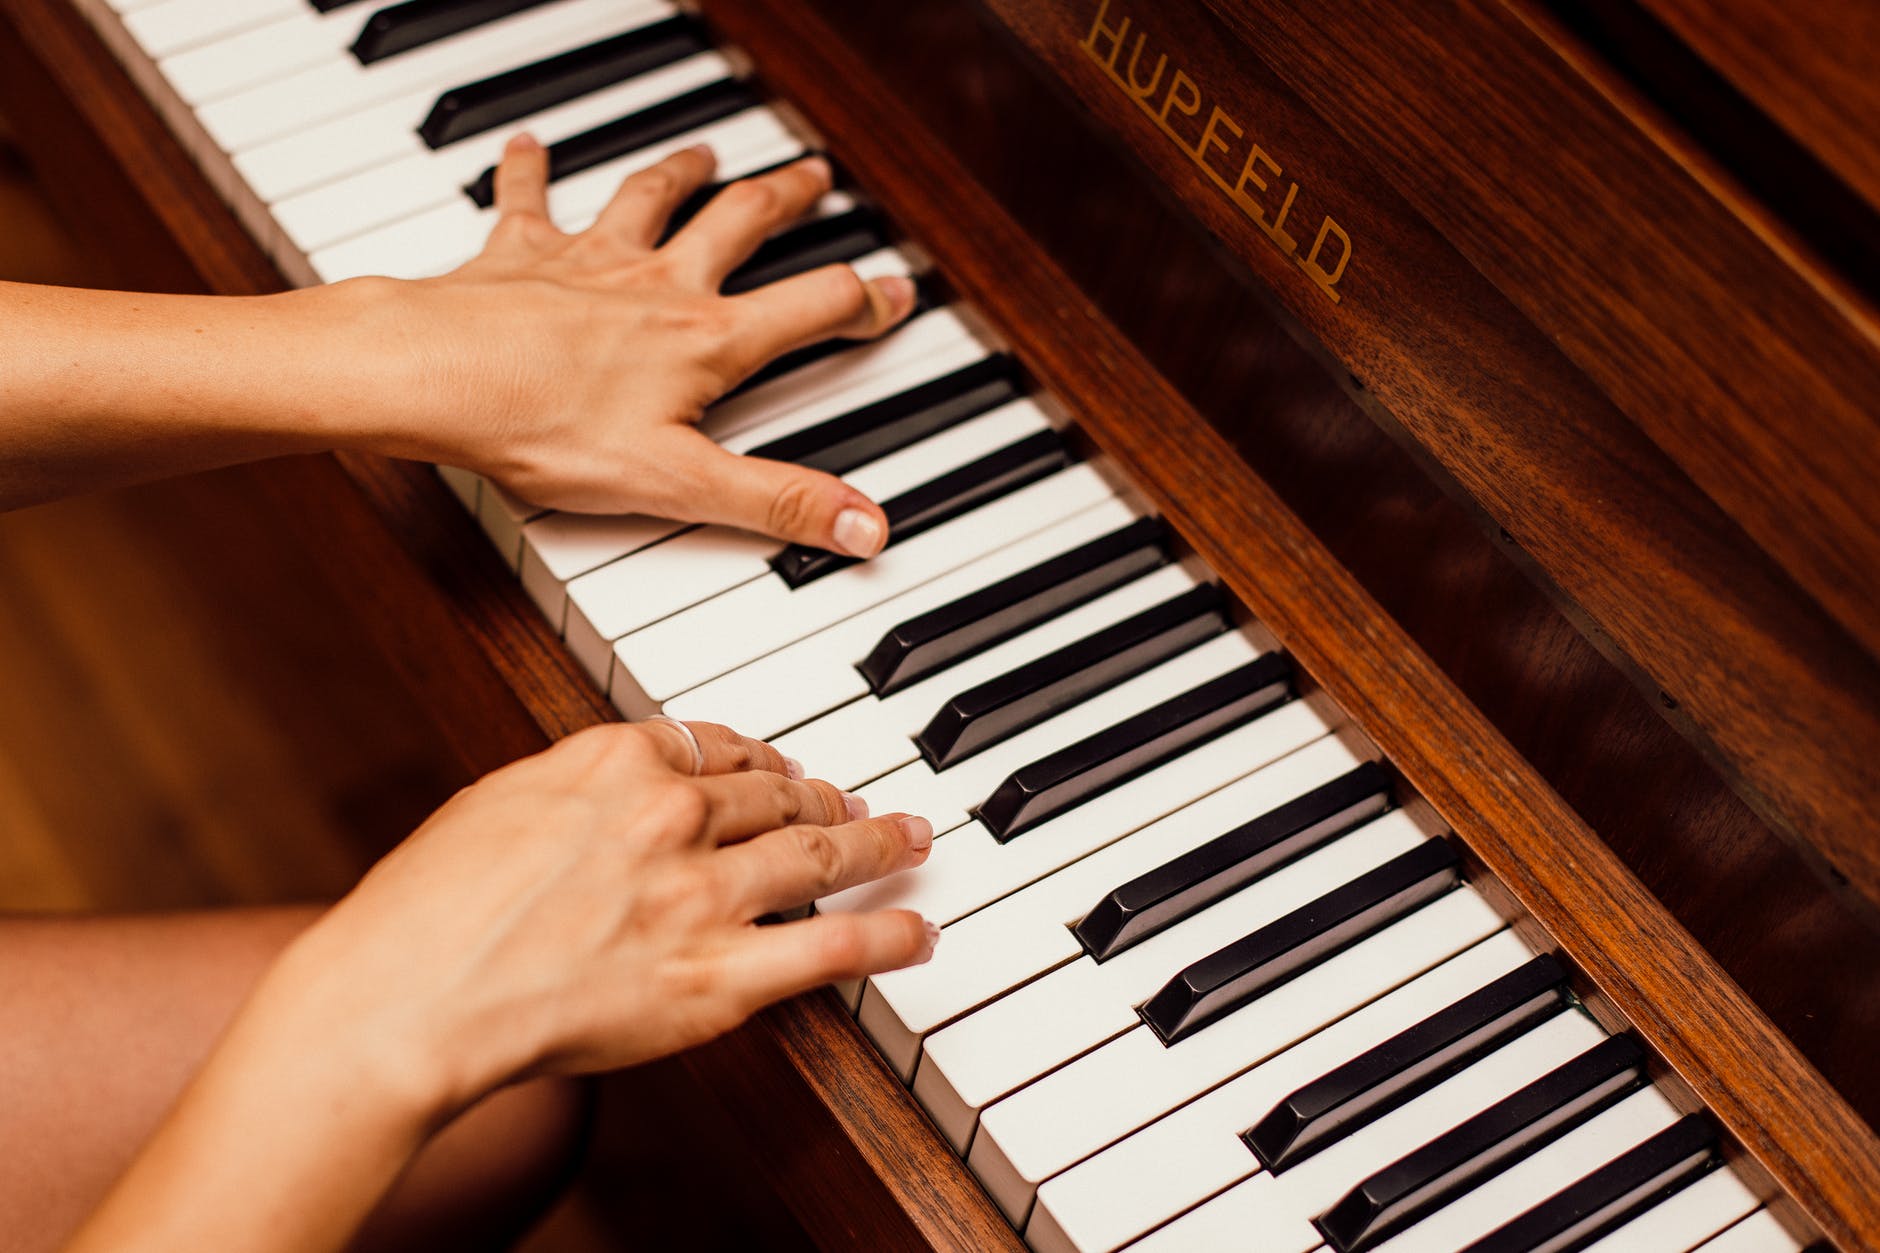 Putney Piano Teachers and Putney Piano Lessons